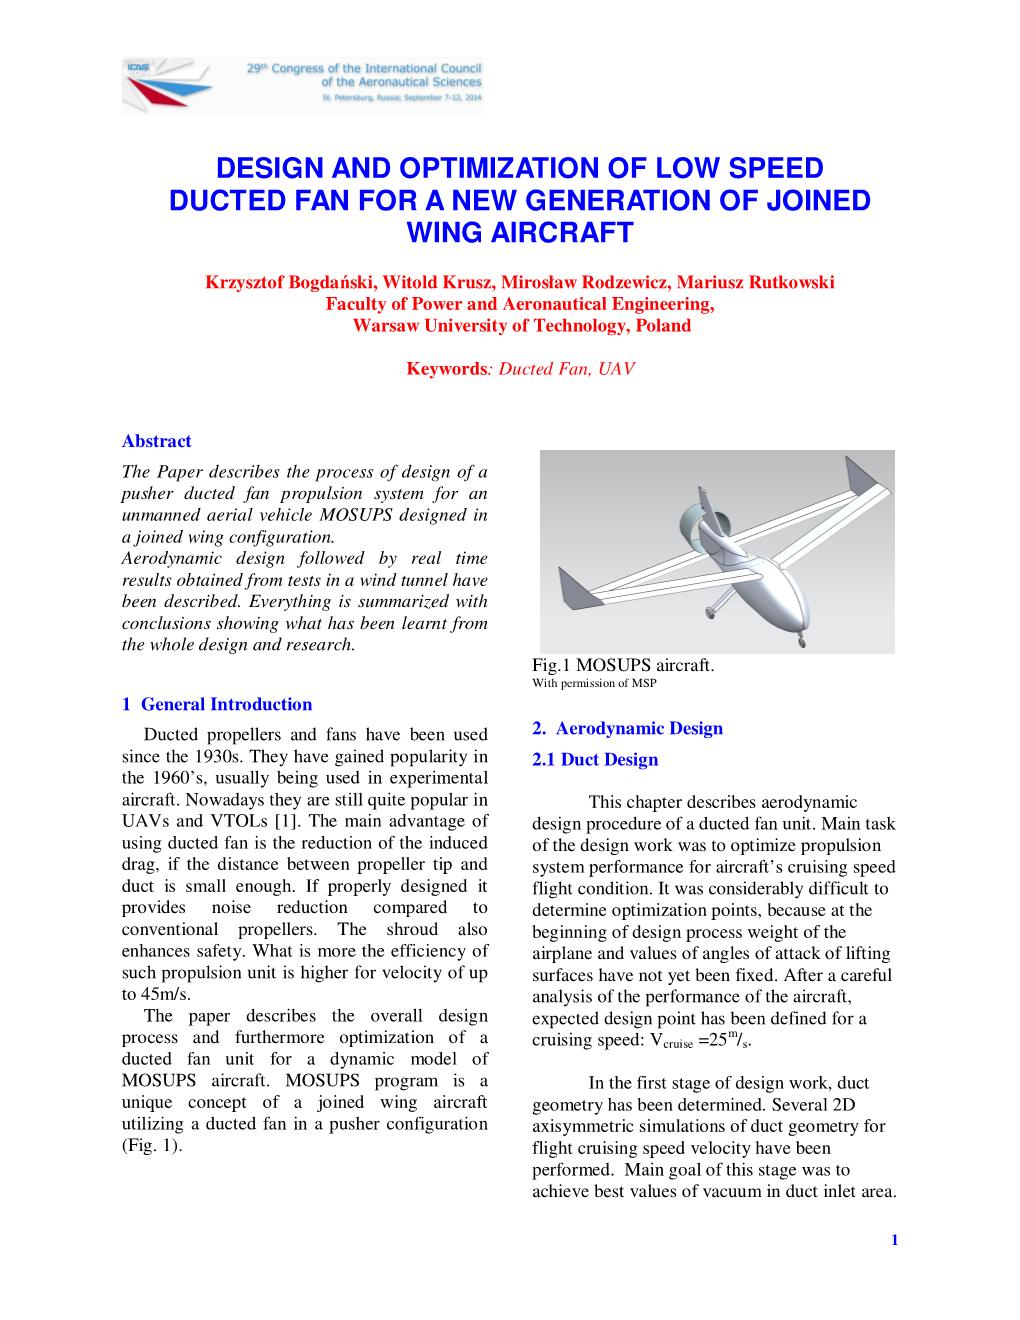 Design and Optimization of Low Speed Ducted Fan for a New Generation of Joined Wing Aircraft